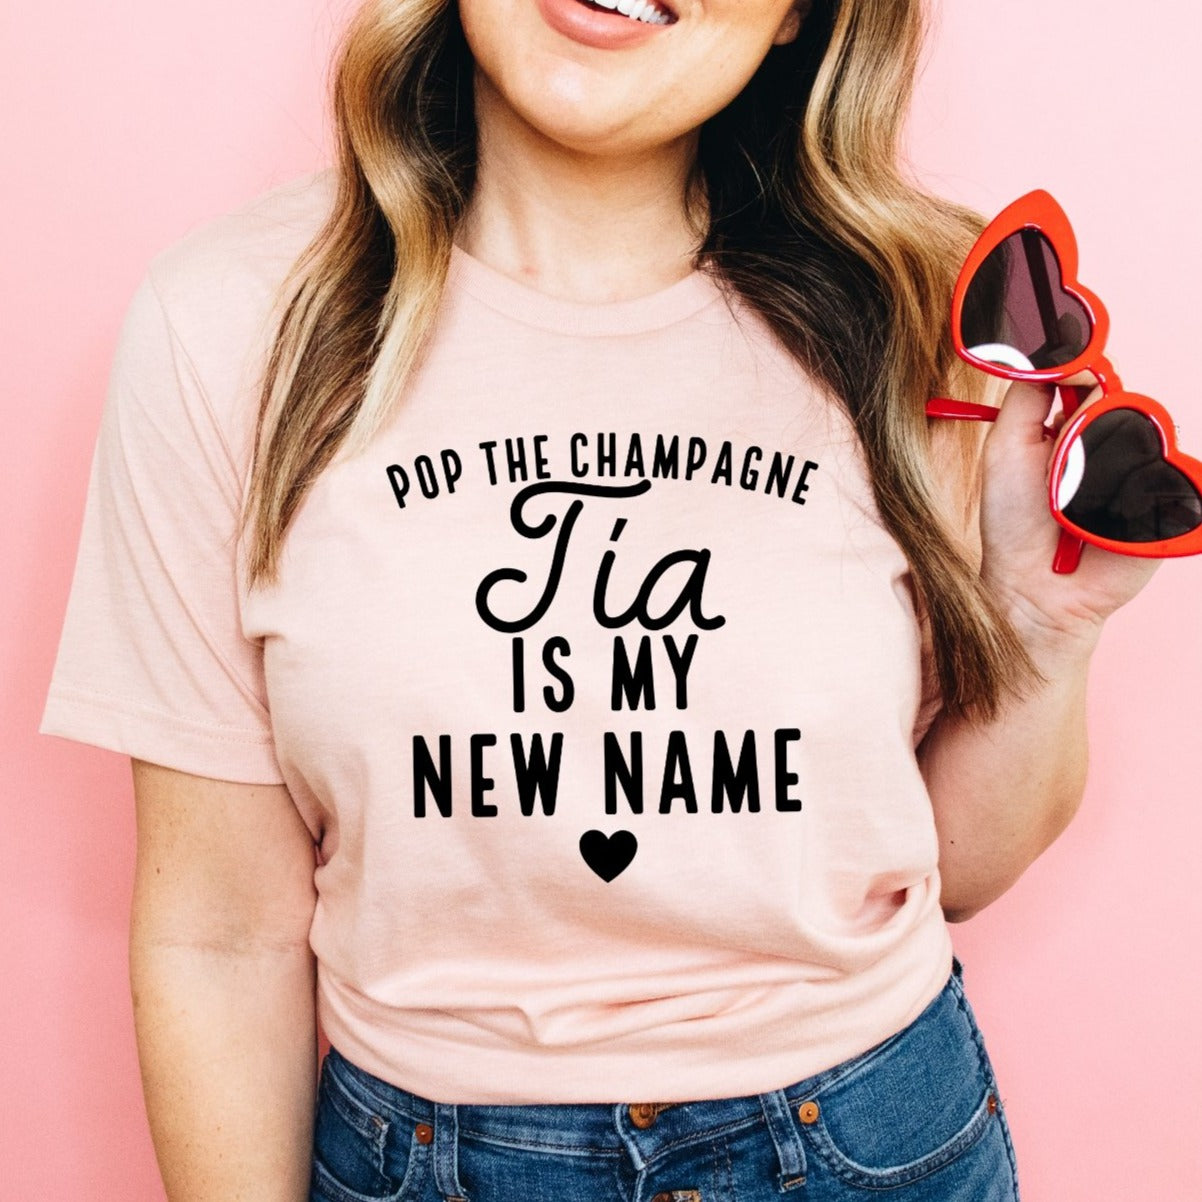 Pop the Champagne Tia is My New Name